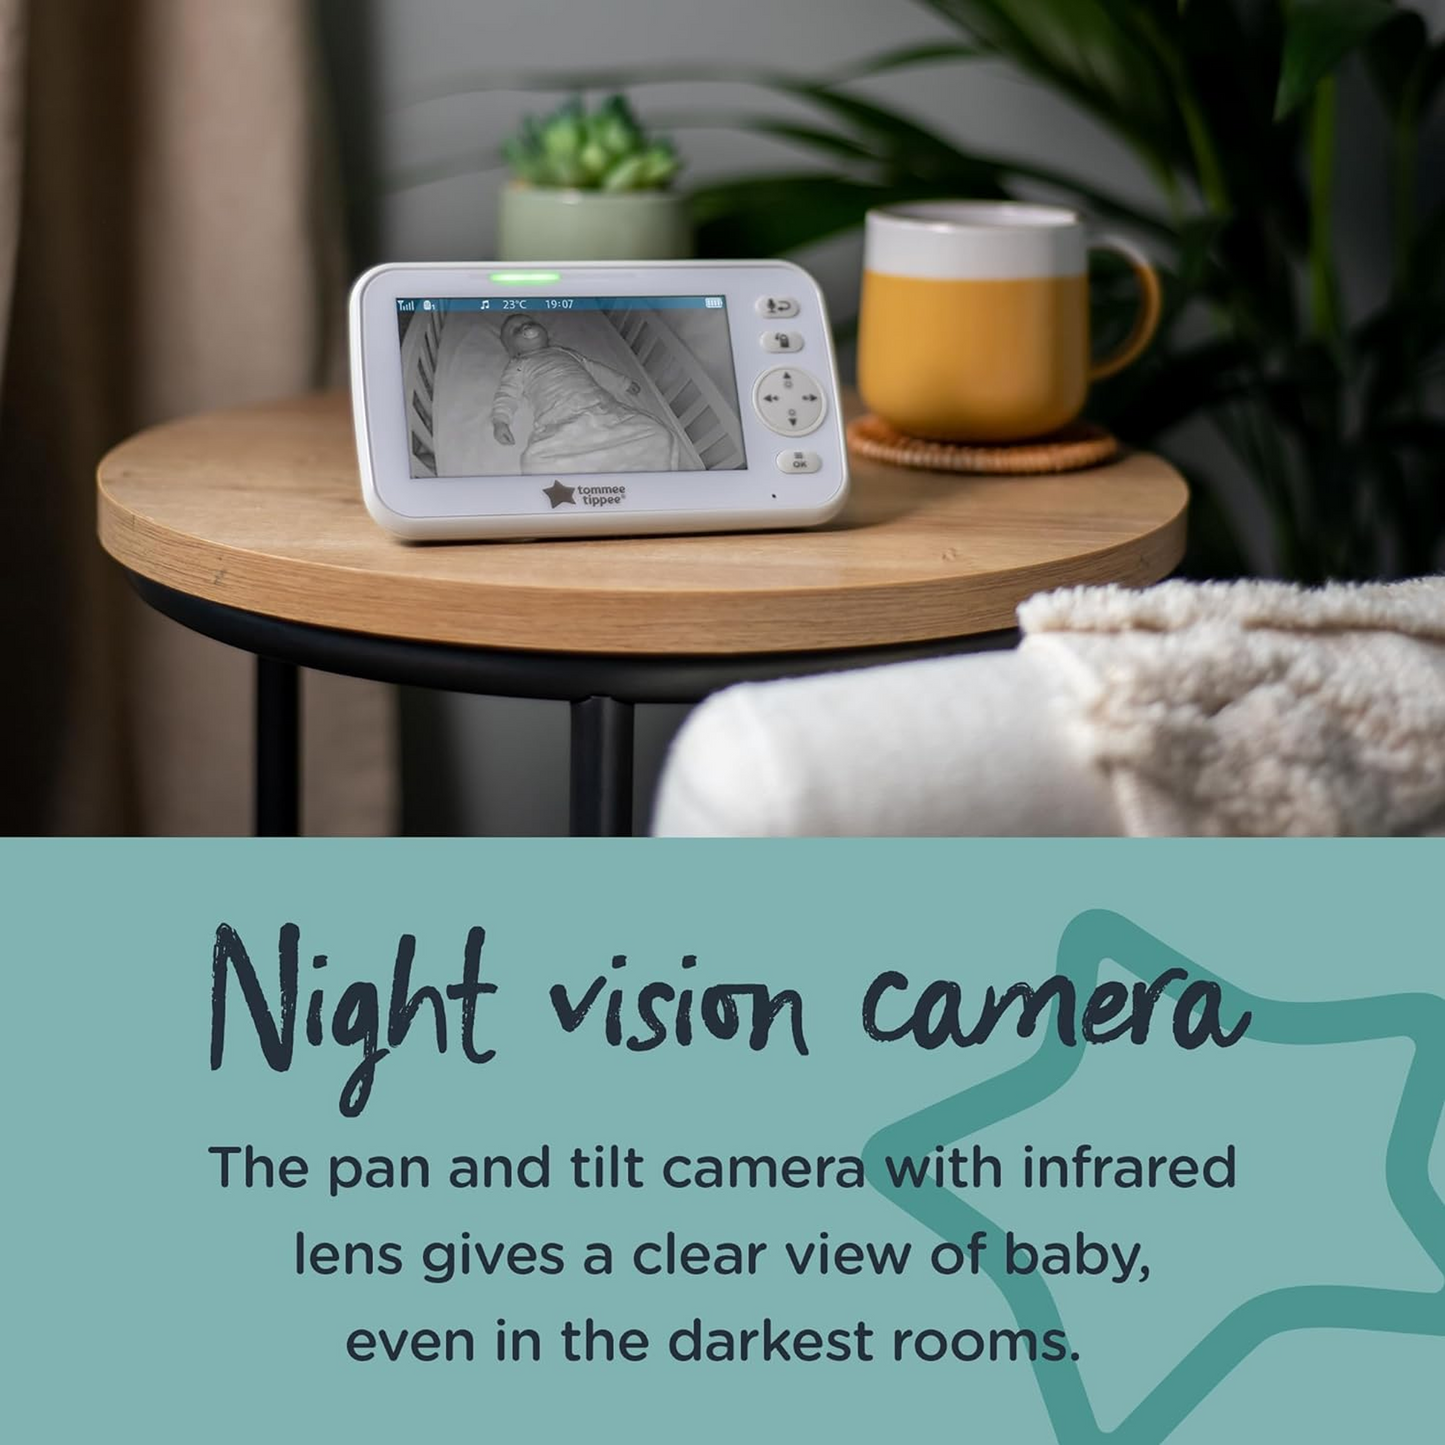 Tommee Tippee Dreamview Audio & HD Video Monitor